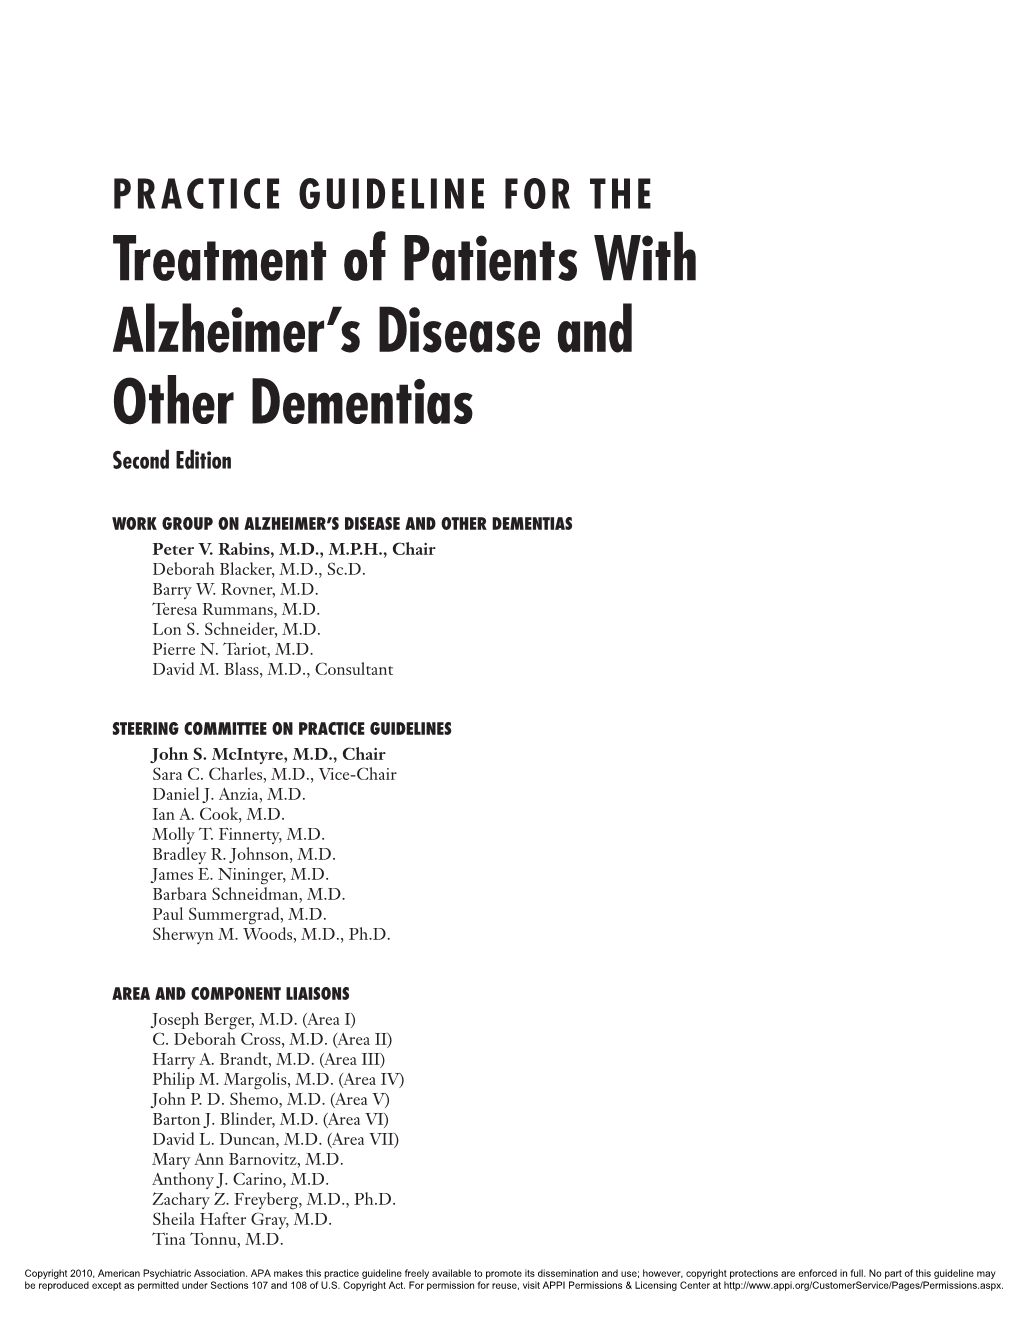 Treatment of Patients with Alzheimer's Disease and Other Dementias